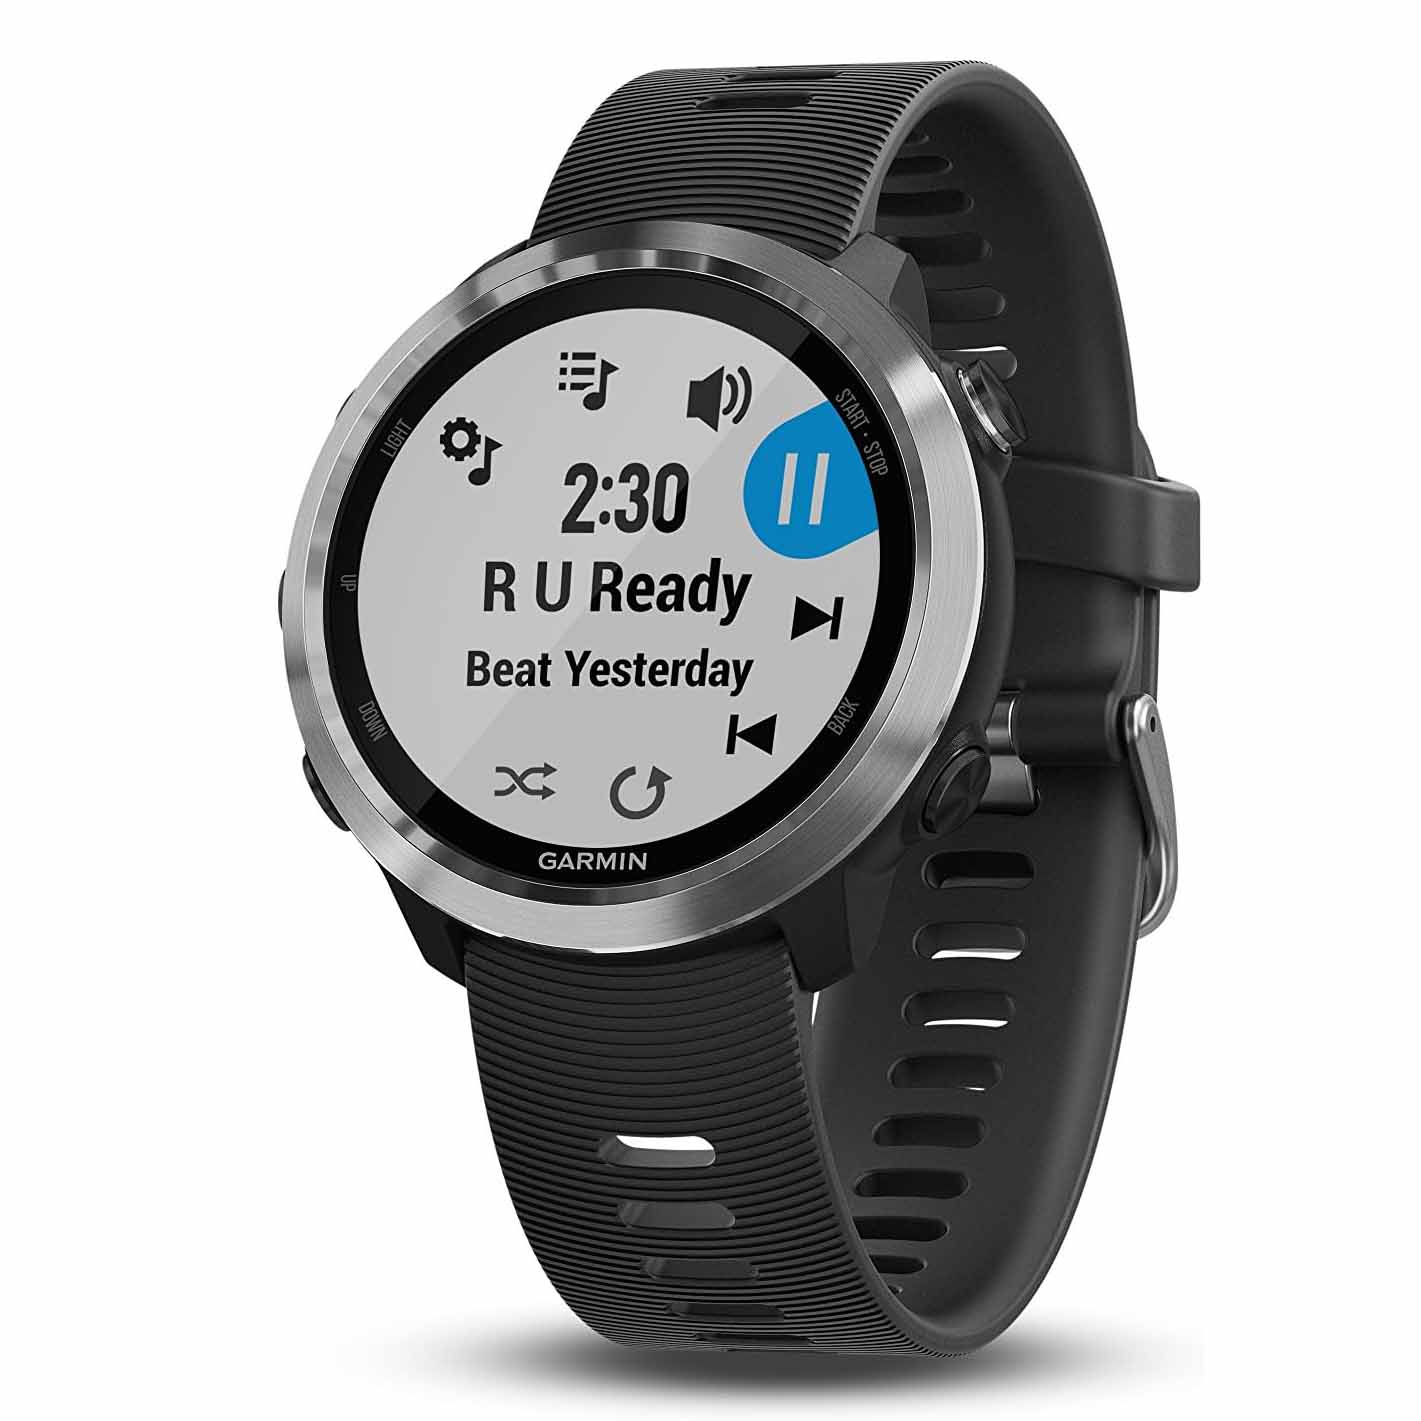 Garmin watch with round LCD display